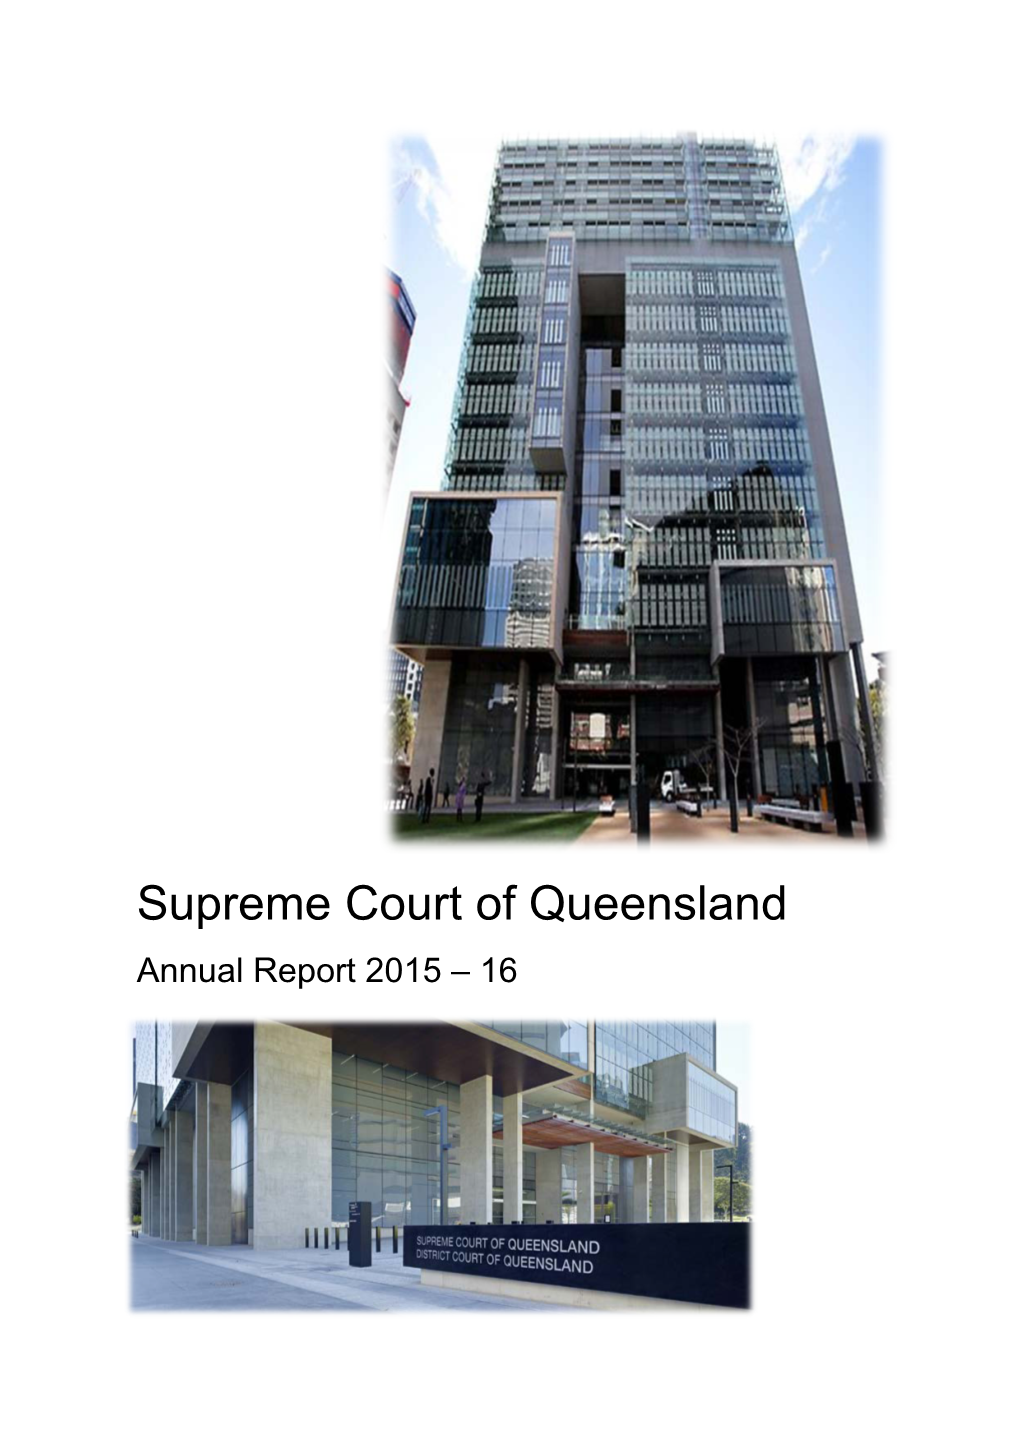 Supreme Court of Queensland Annual Report 2015 – 16